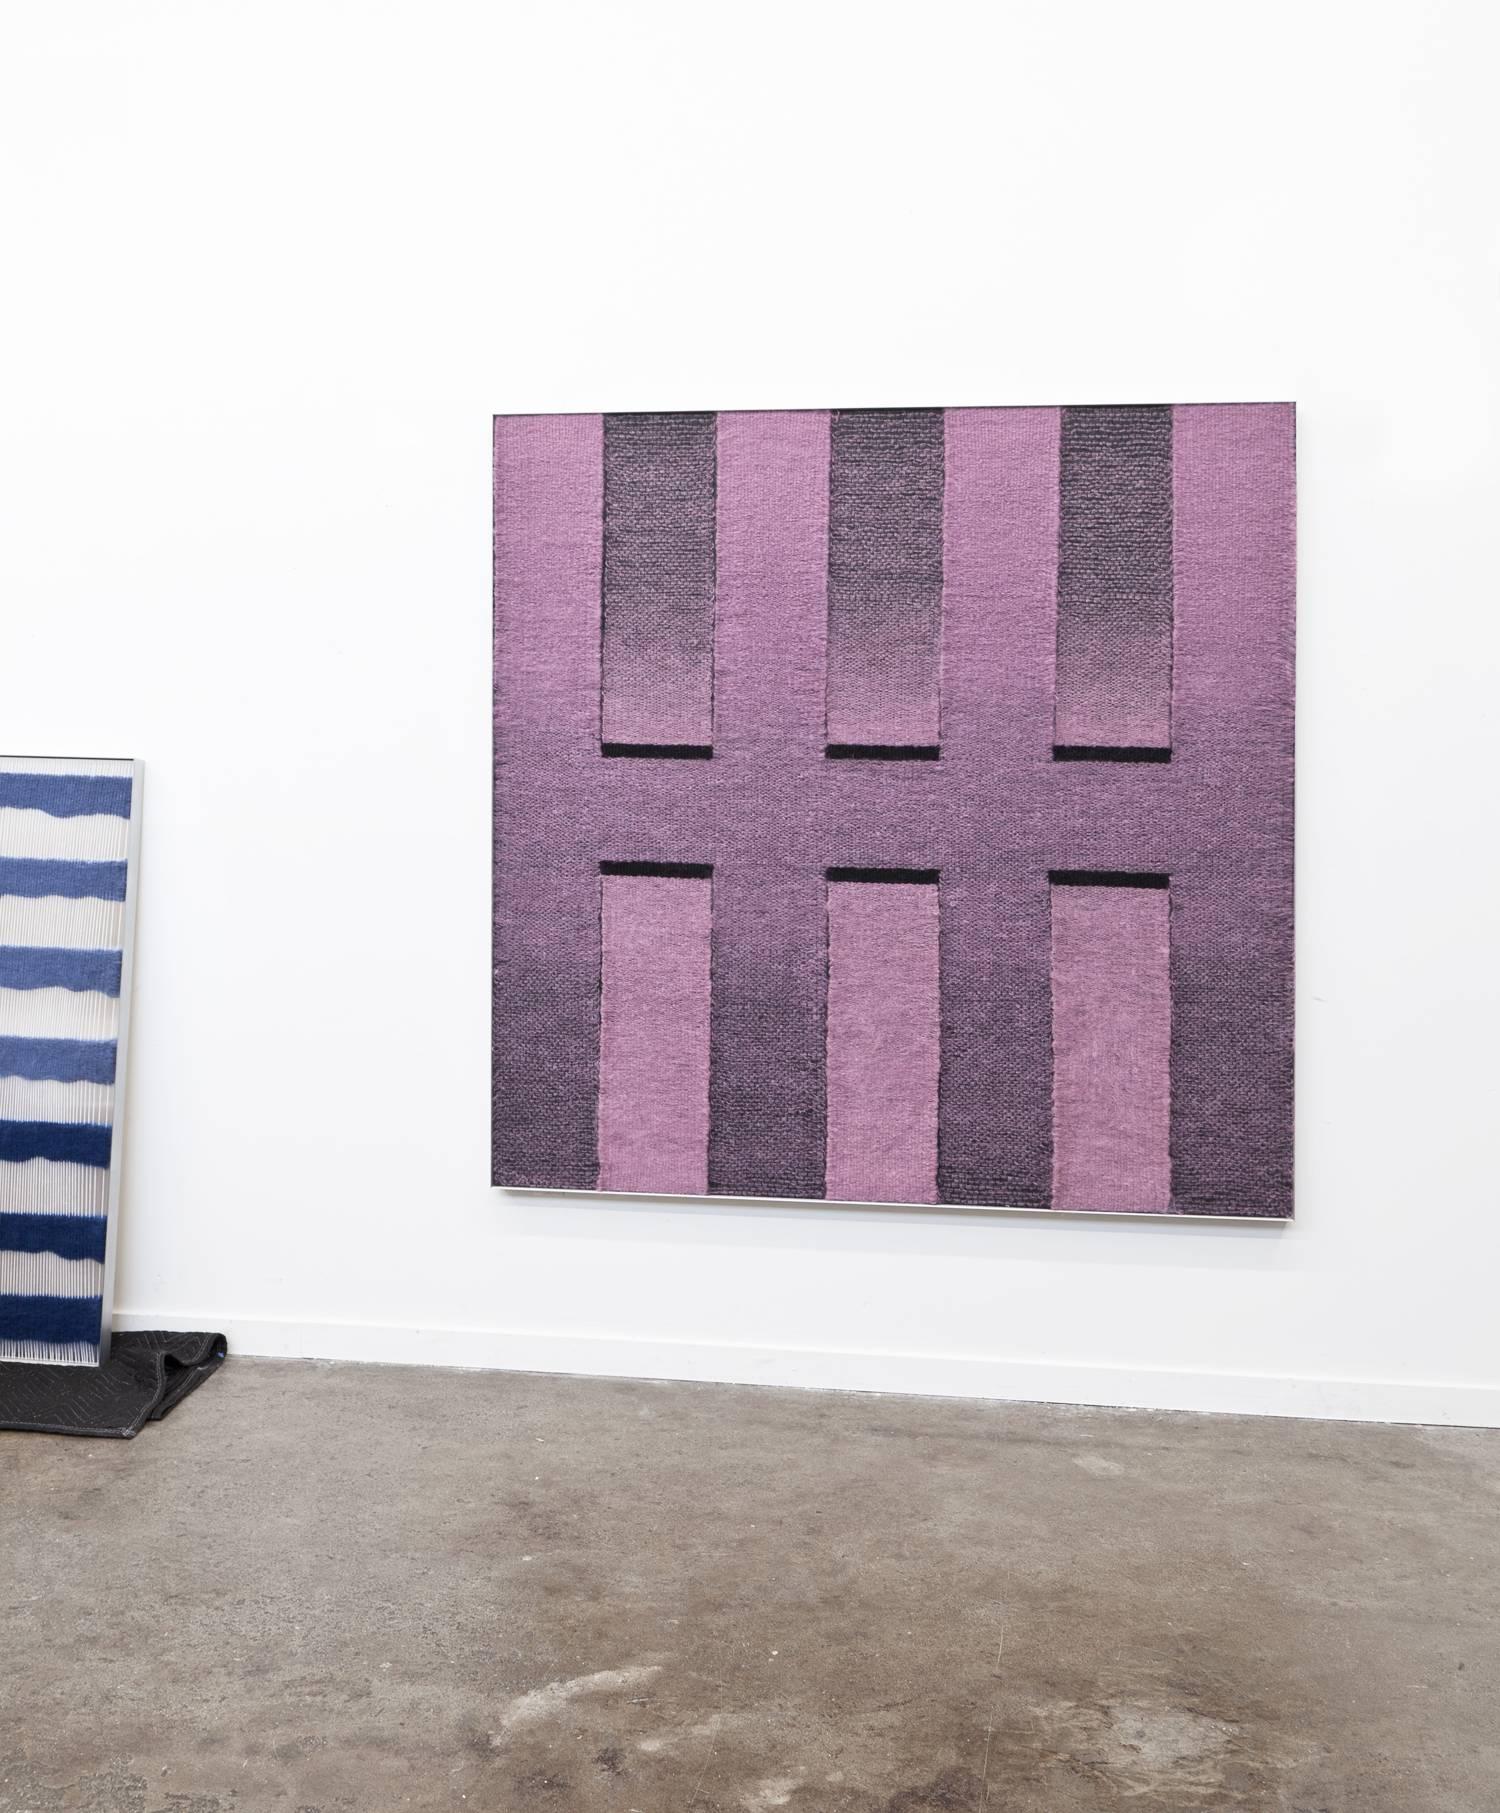 Post-Modern Contemporary Weaving Textile Fiber Art, Pink to Black Rectangles by Mimi Jung For Sale